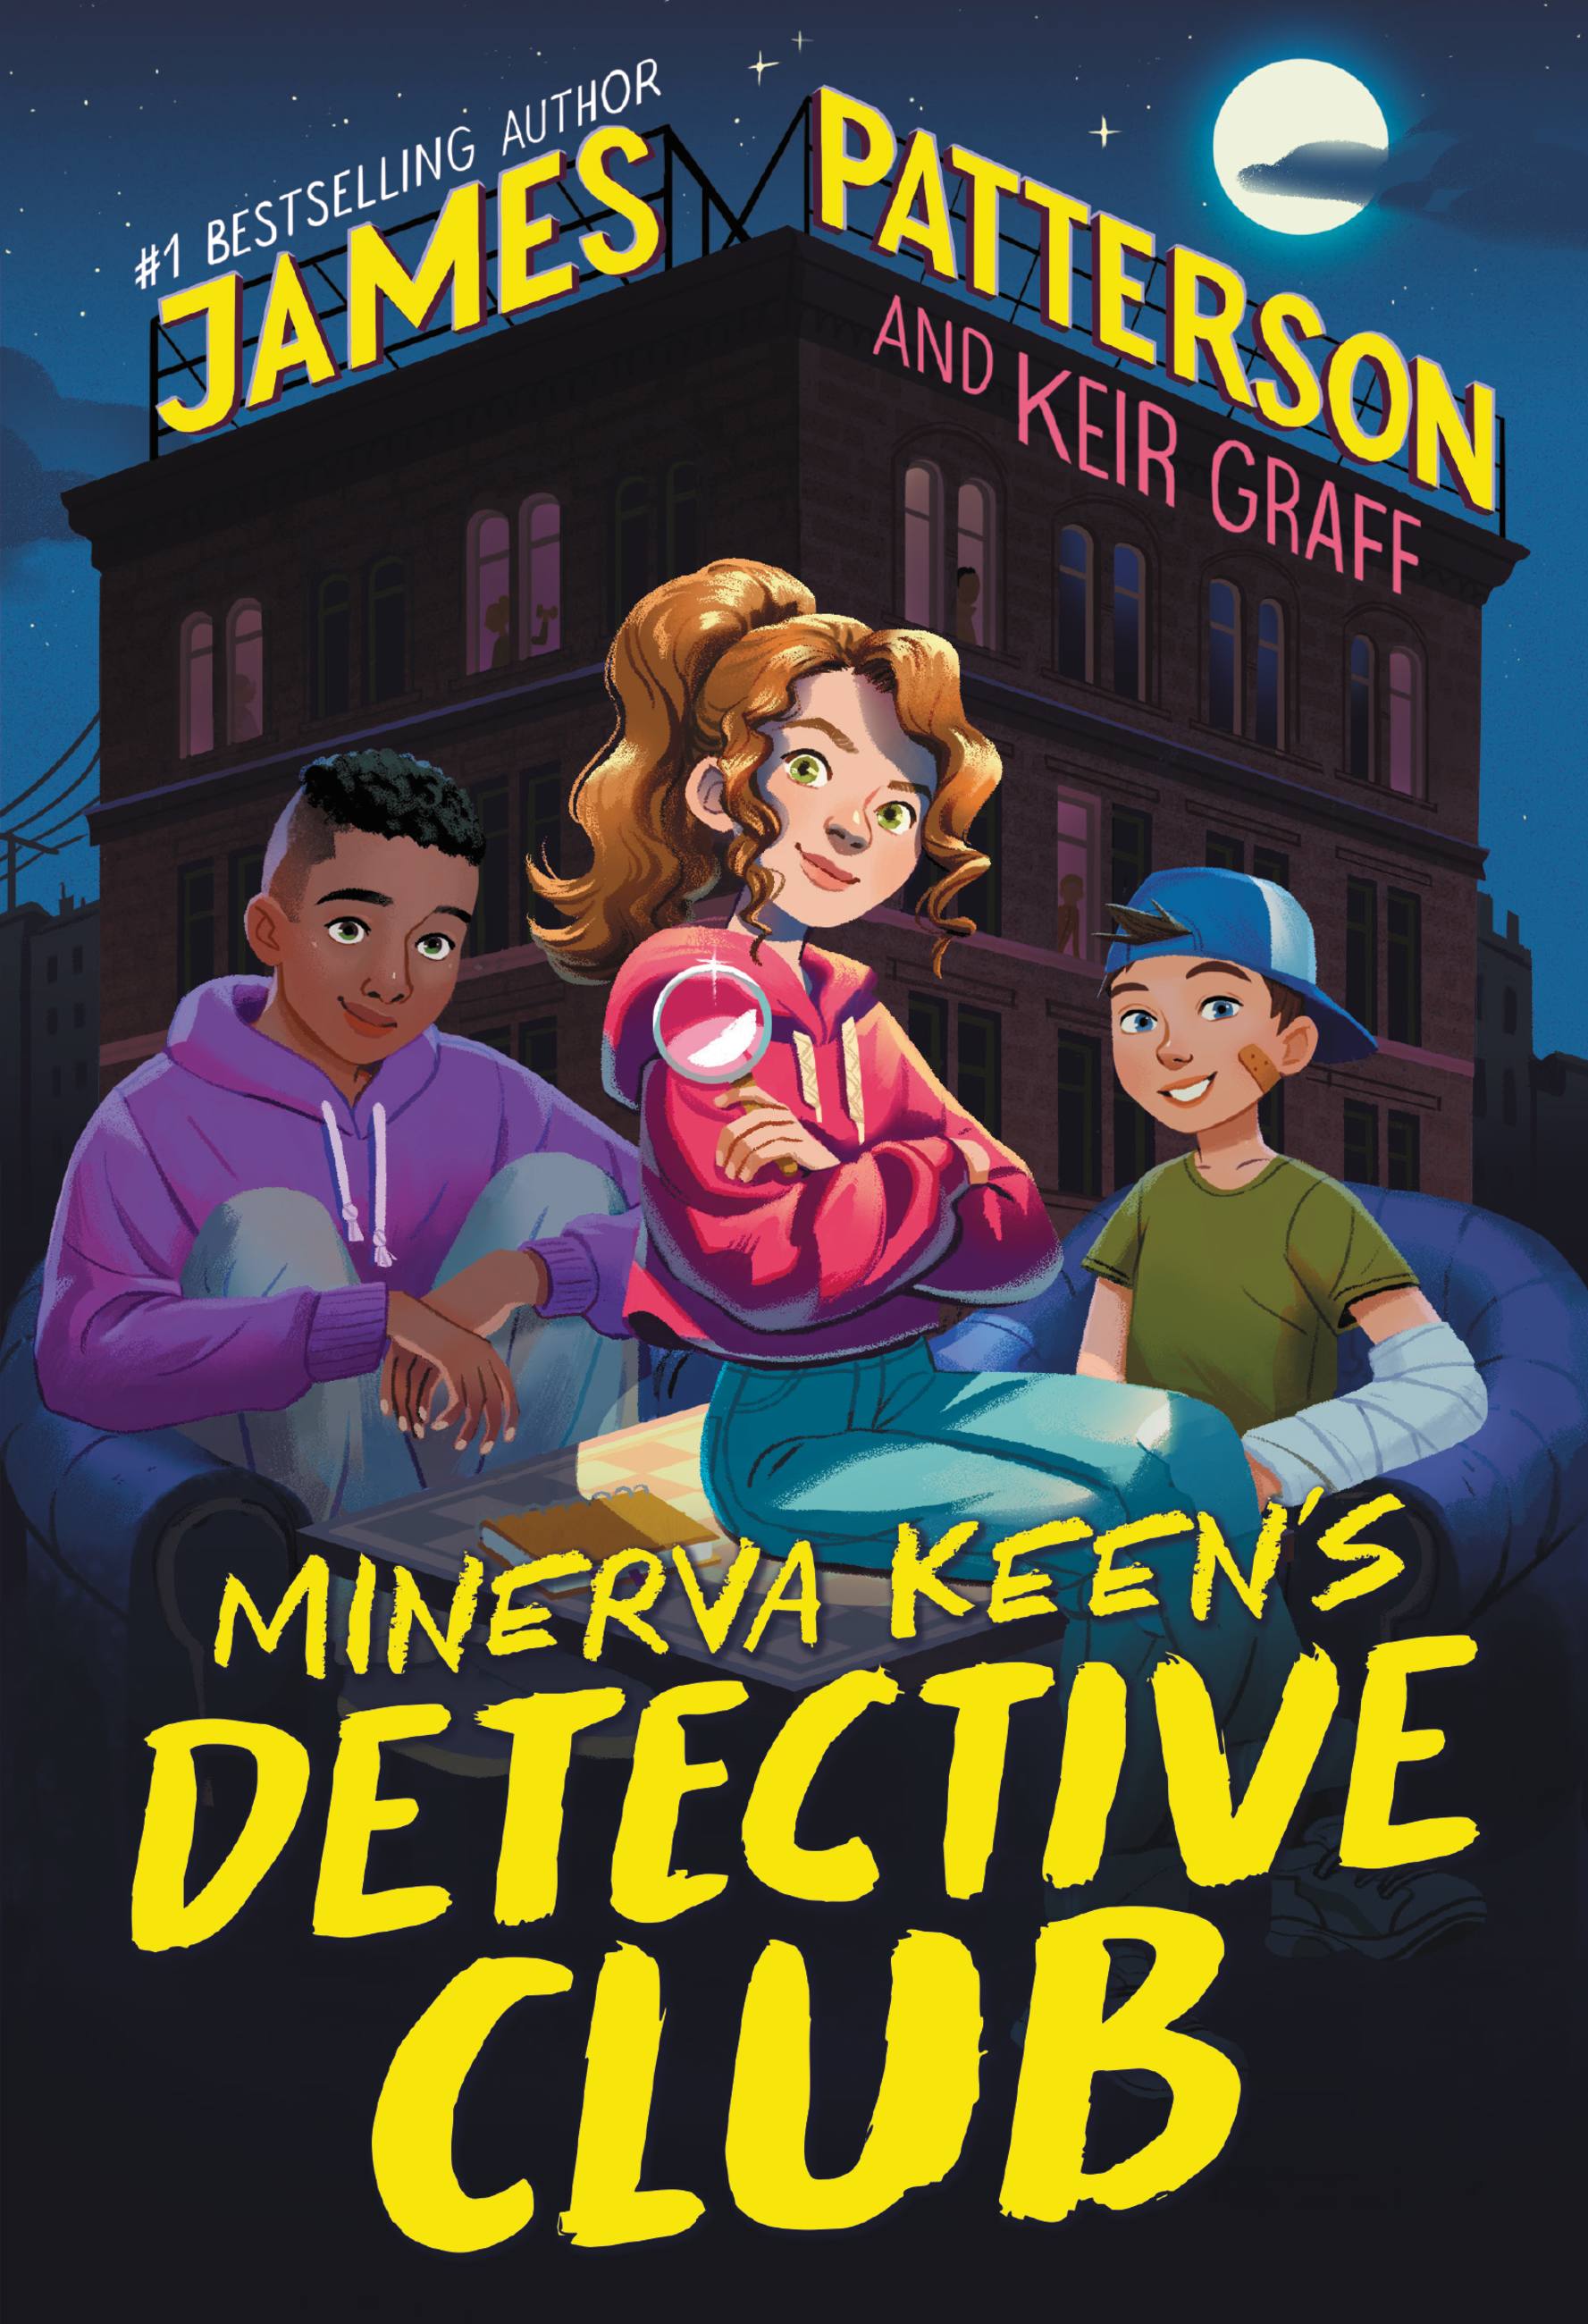 Minerva Keen's Detective Club by James Patterson | Hachette Book Group